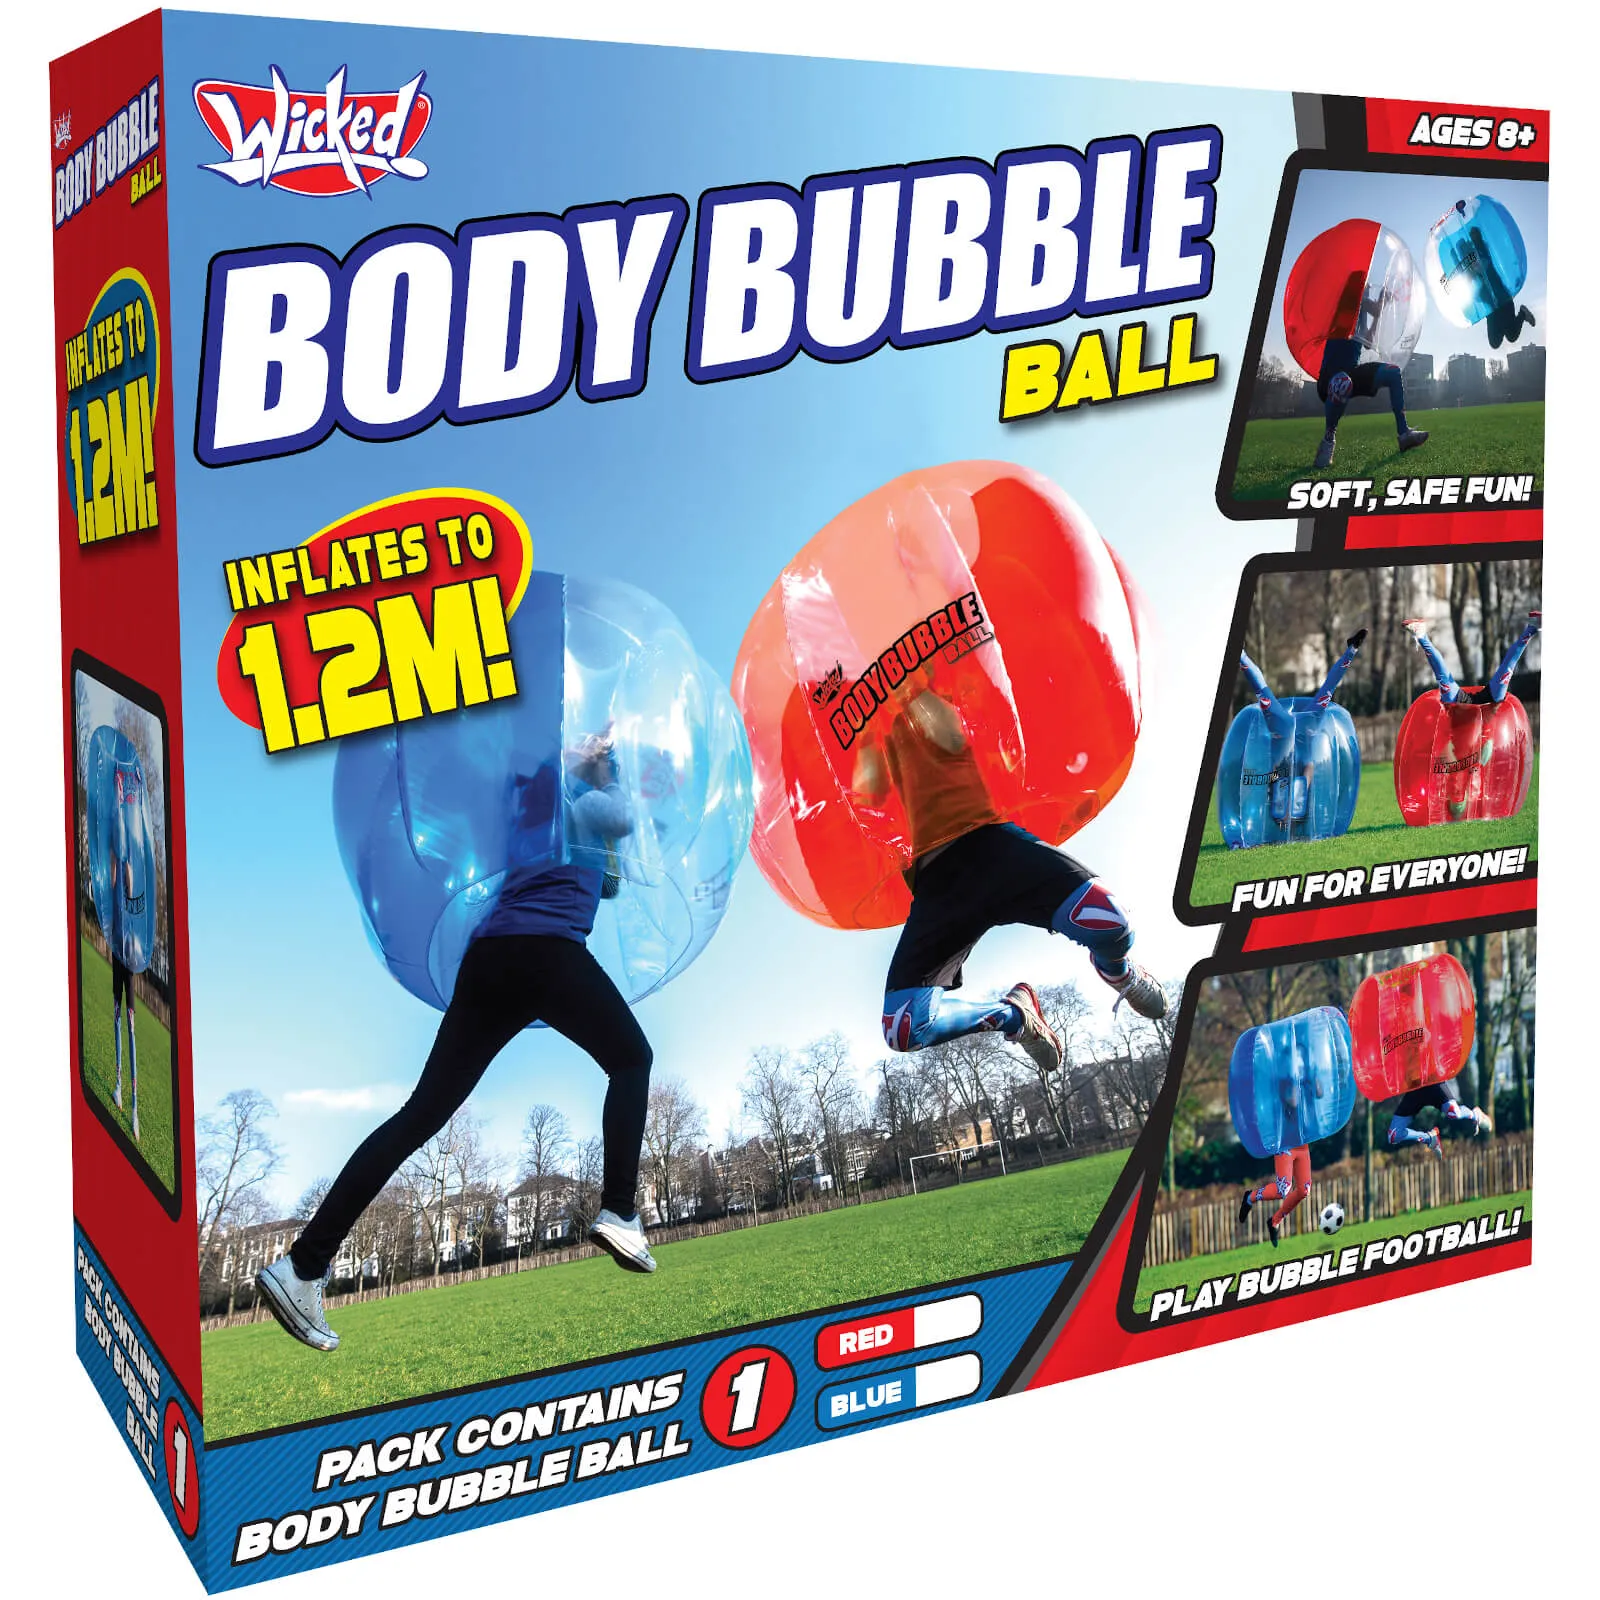  Body Bubble Ball - Large Inflatable Outdoor Game - Red